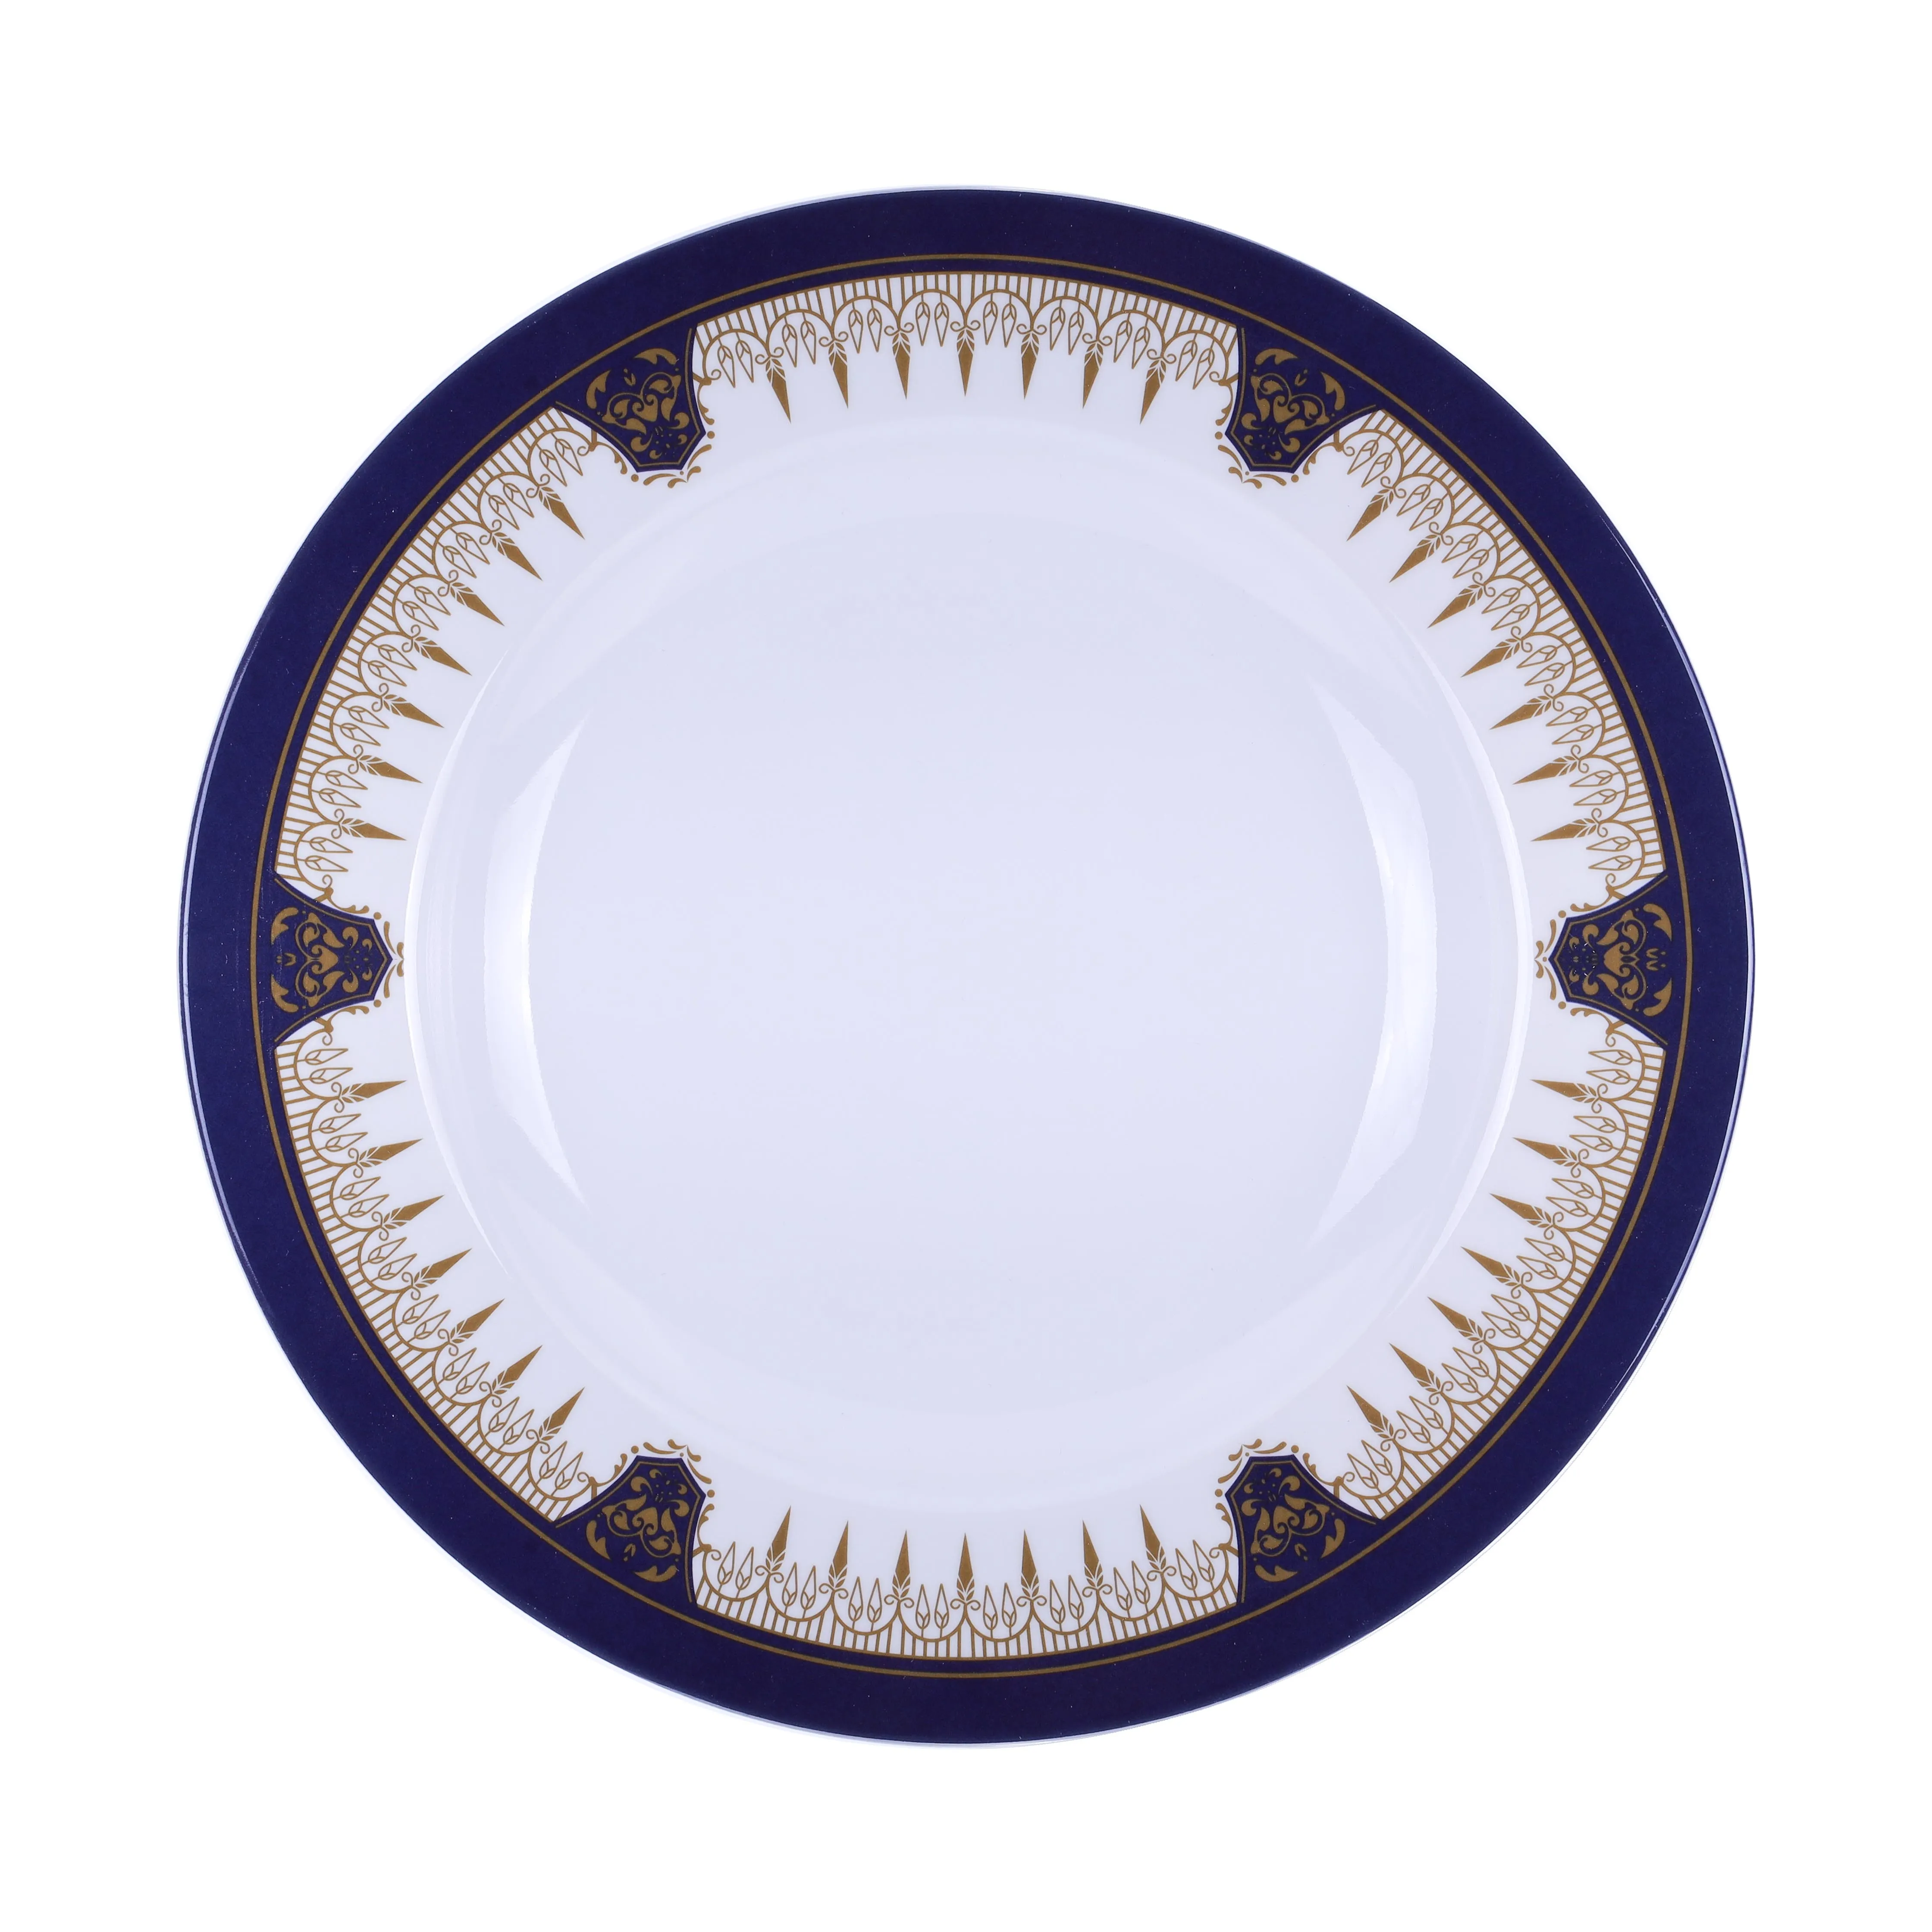 Royalford  10 Soup Plate - Soup Plates Pasta Plates plate with playful Classic decoration, dishwasher safe Ideal for Soup, Deserts, Ice Cream & More